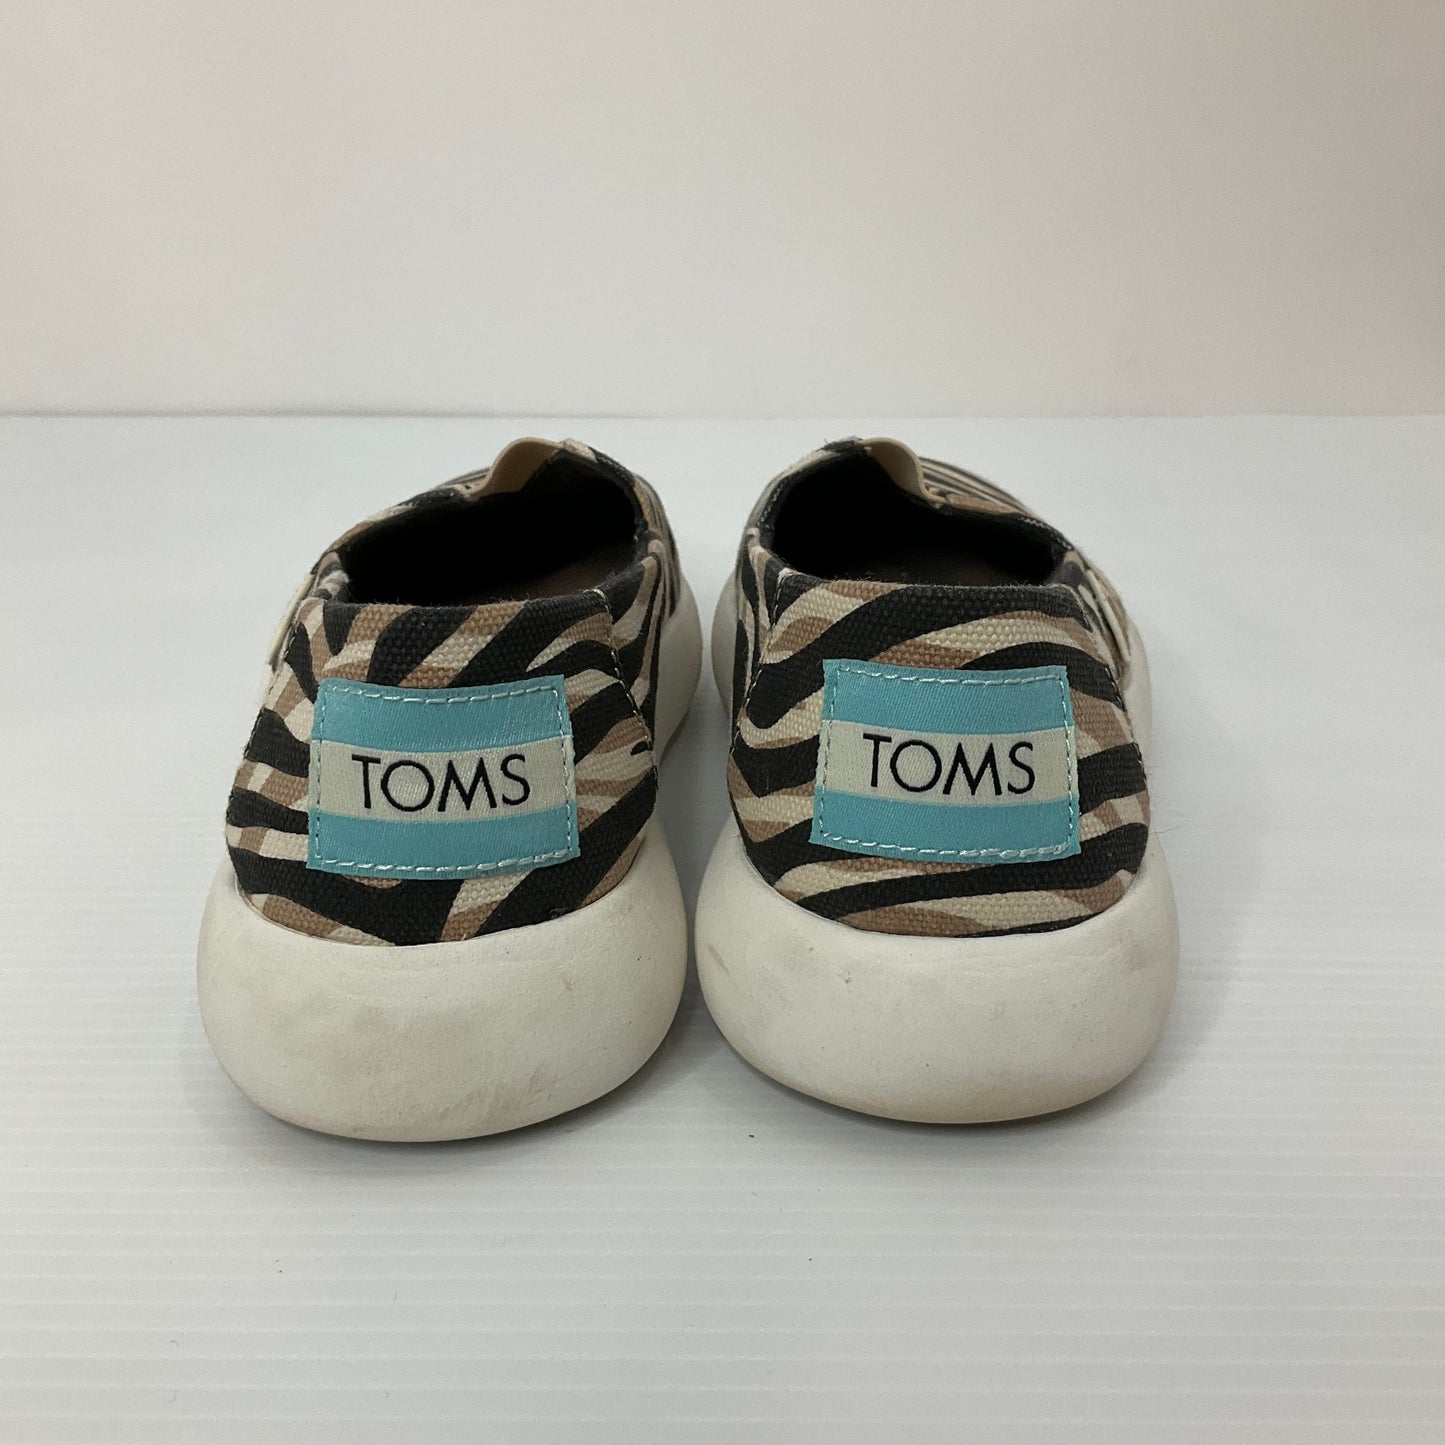 Animal Print Shoes Sneakers Toms, Size 6